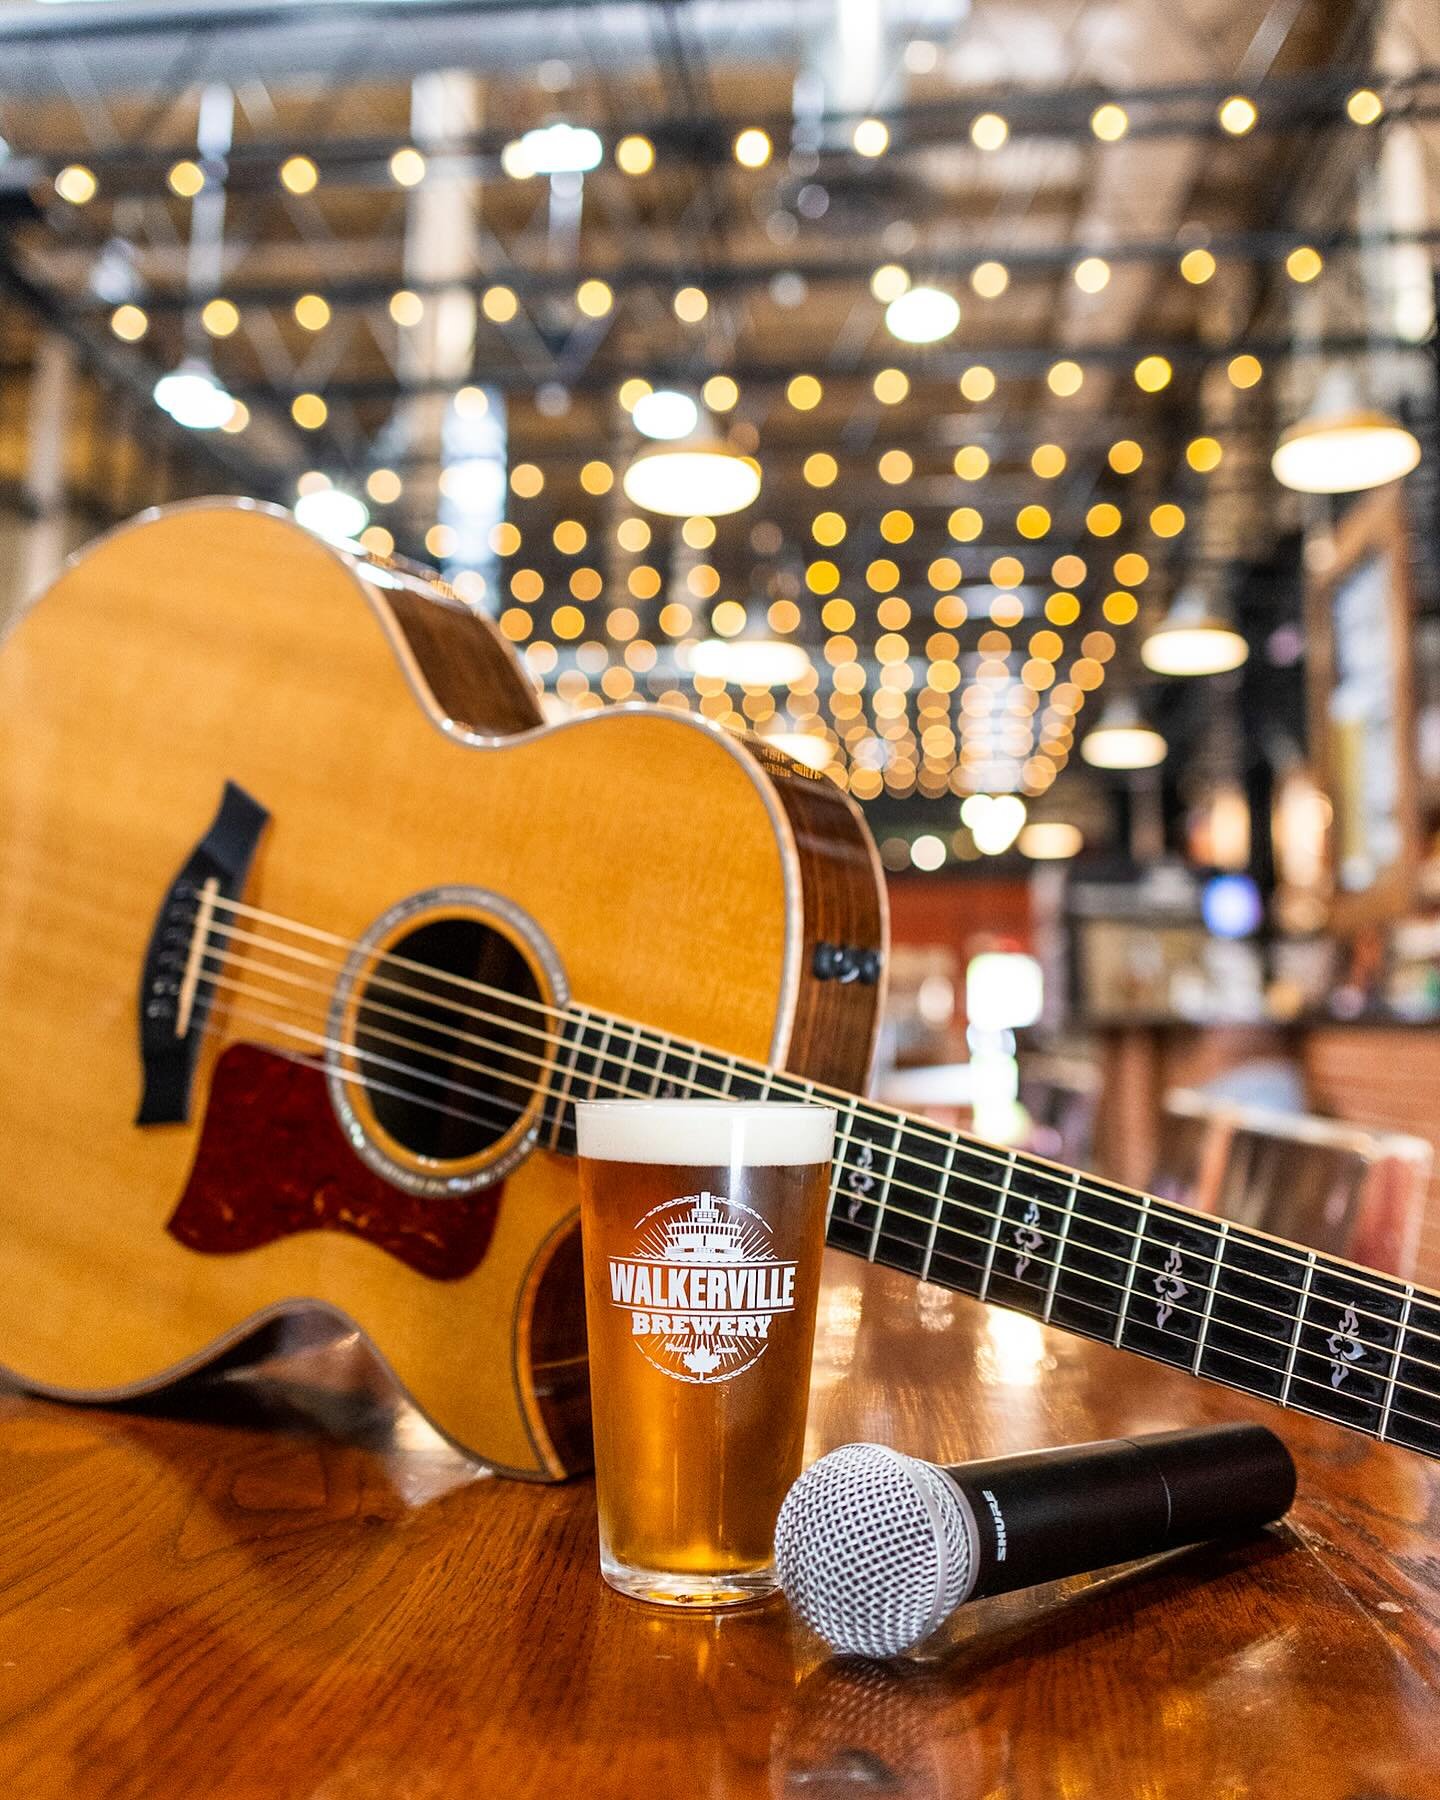 Did you know we have live music every Friday here at Walkerville Brewery?! 🎶 

This weekend, enjoy tunes from @justin_latam from 6-9PM and check out the EVENTS link in our bio for all upcoming Friday line-ups! 

. . . 

PLUS put in some miles with t